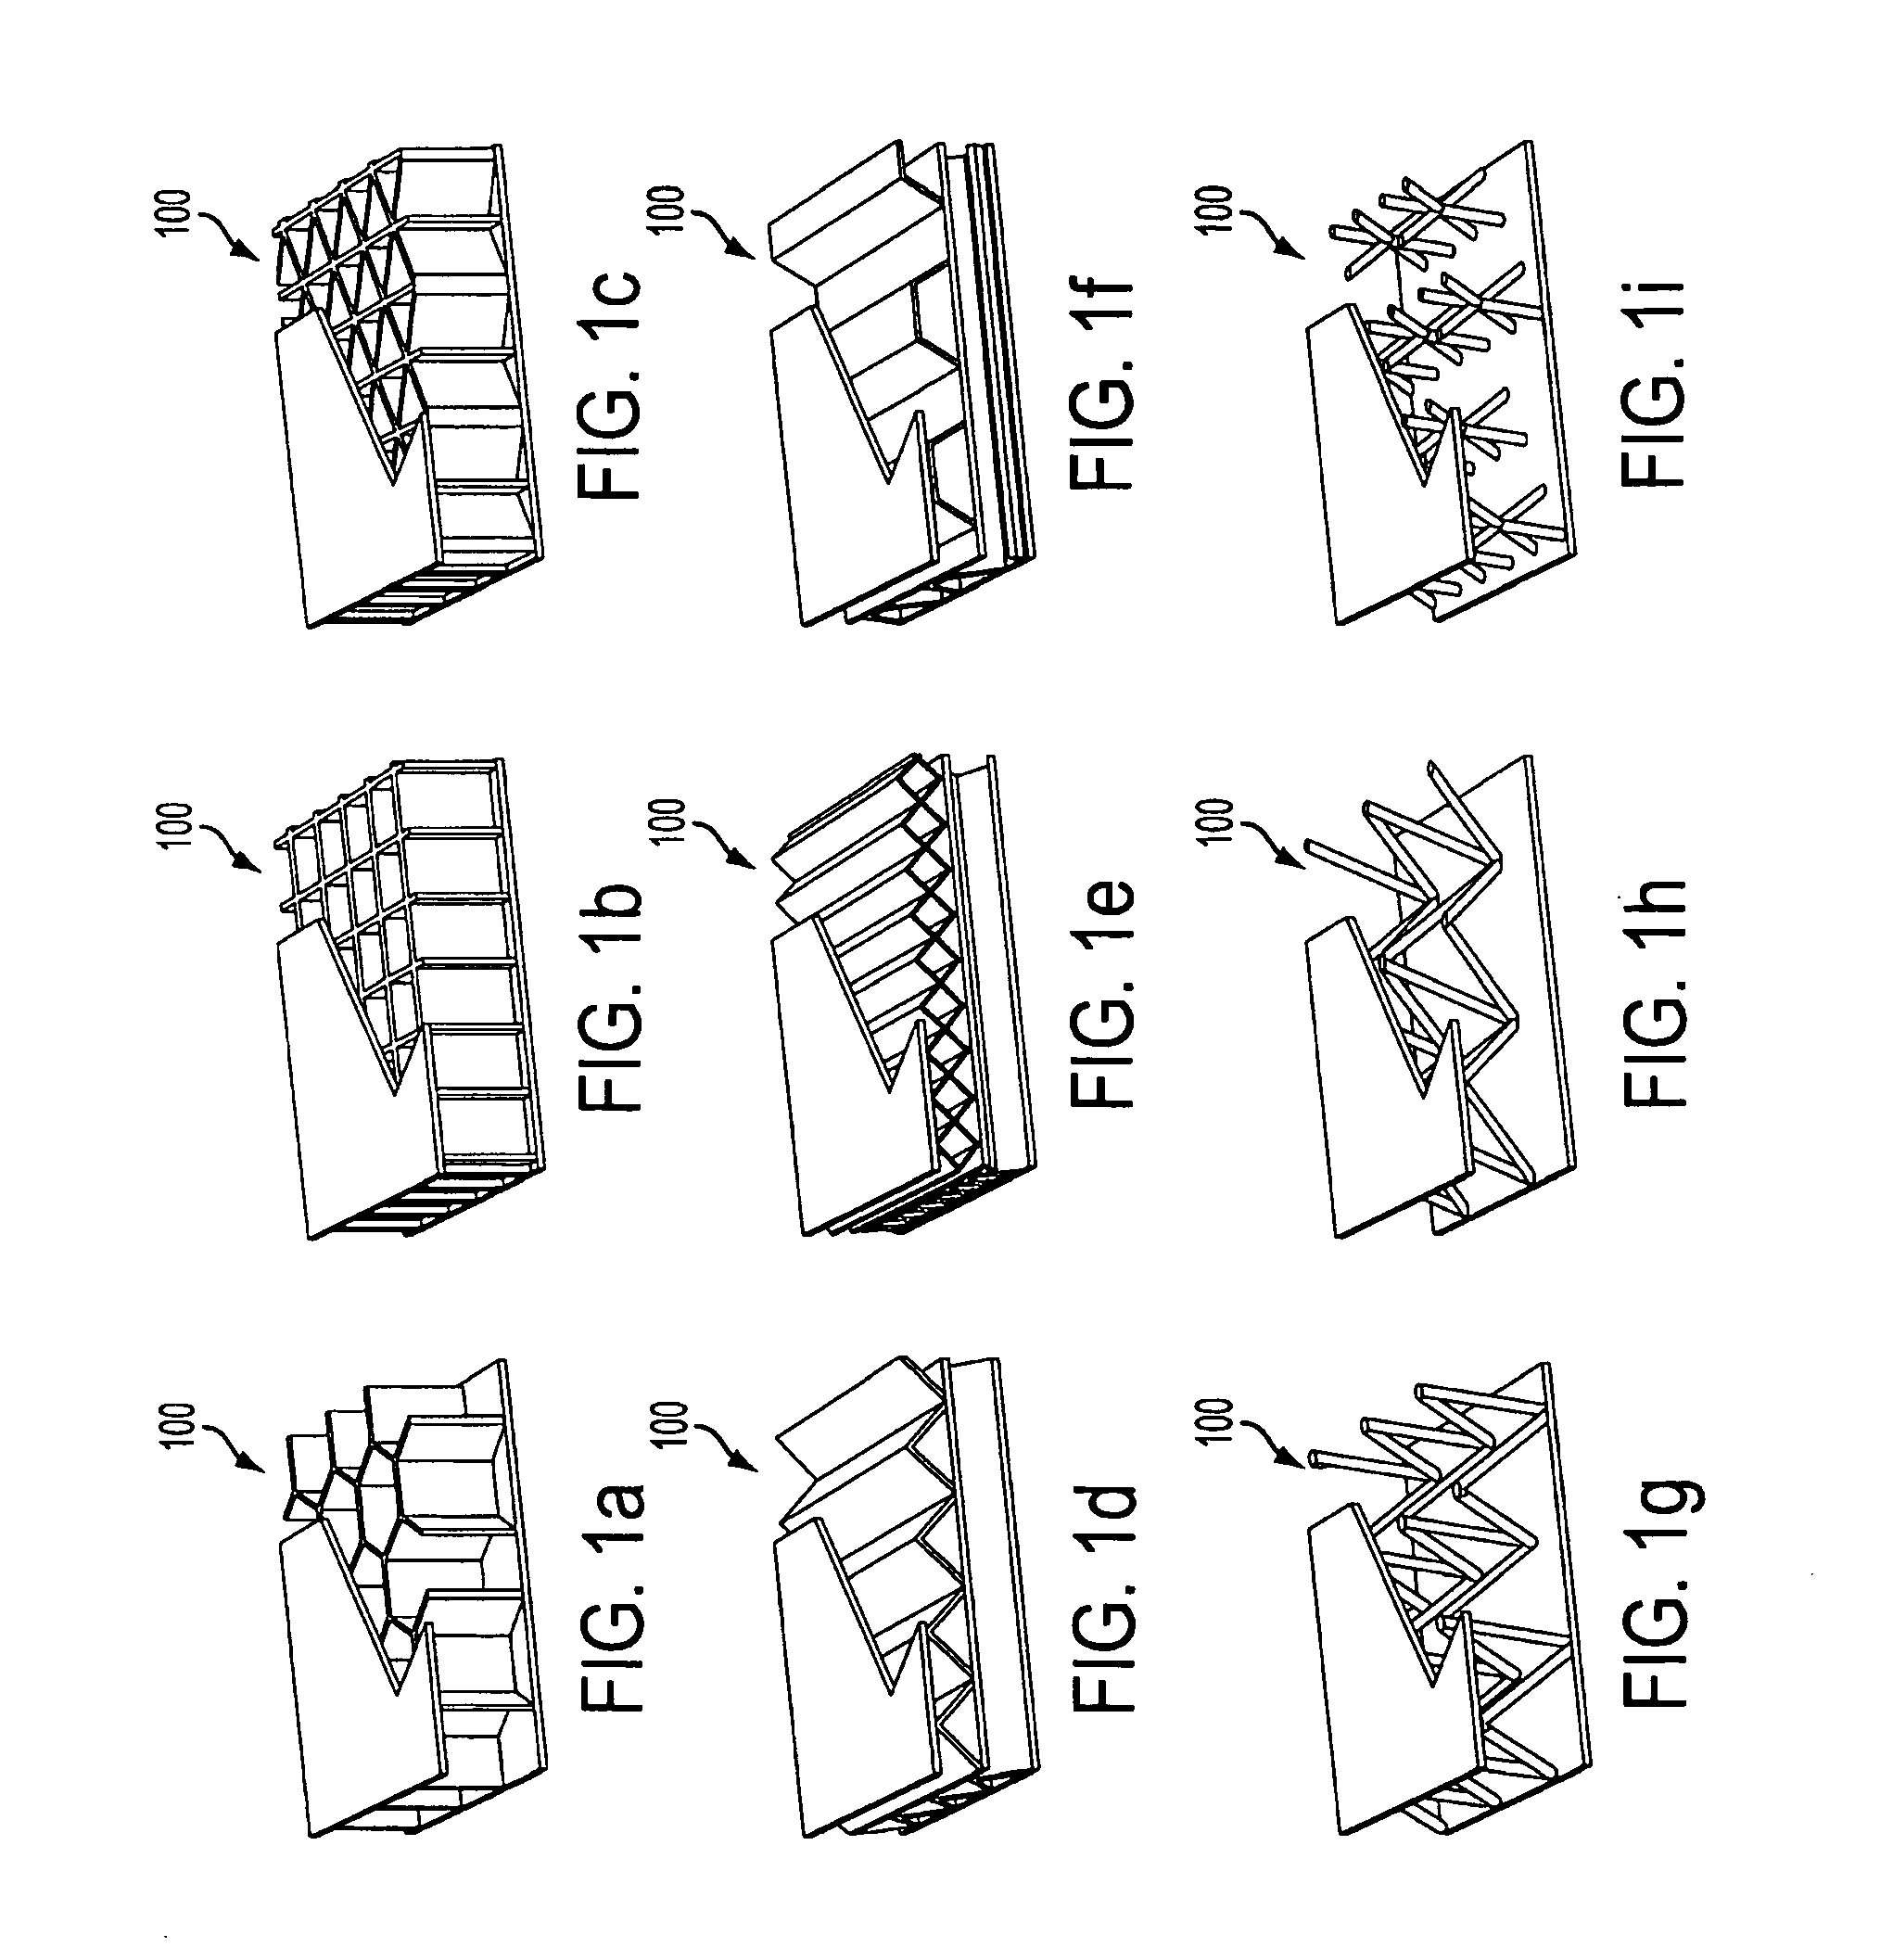 Hybrid Periodic Cellular Material Structures, Systems, and Methods For Blast and Ballistic Protection